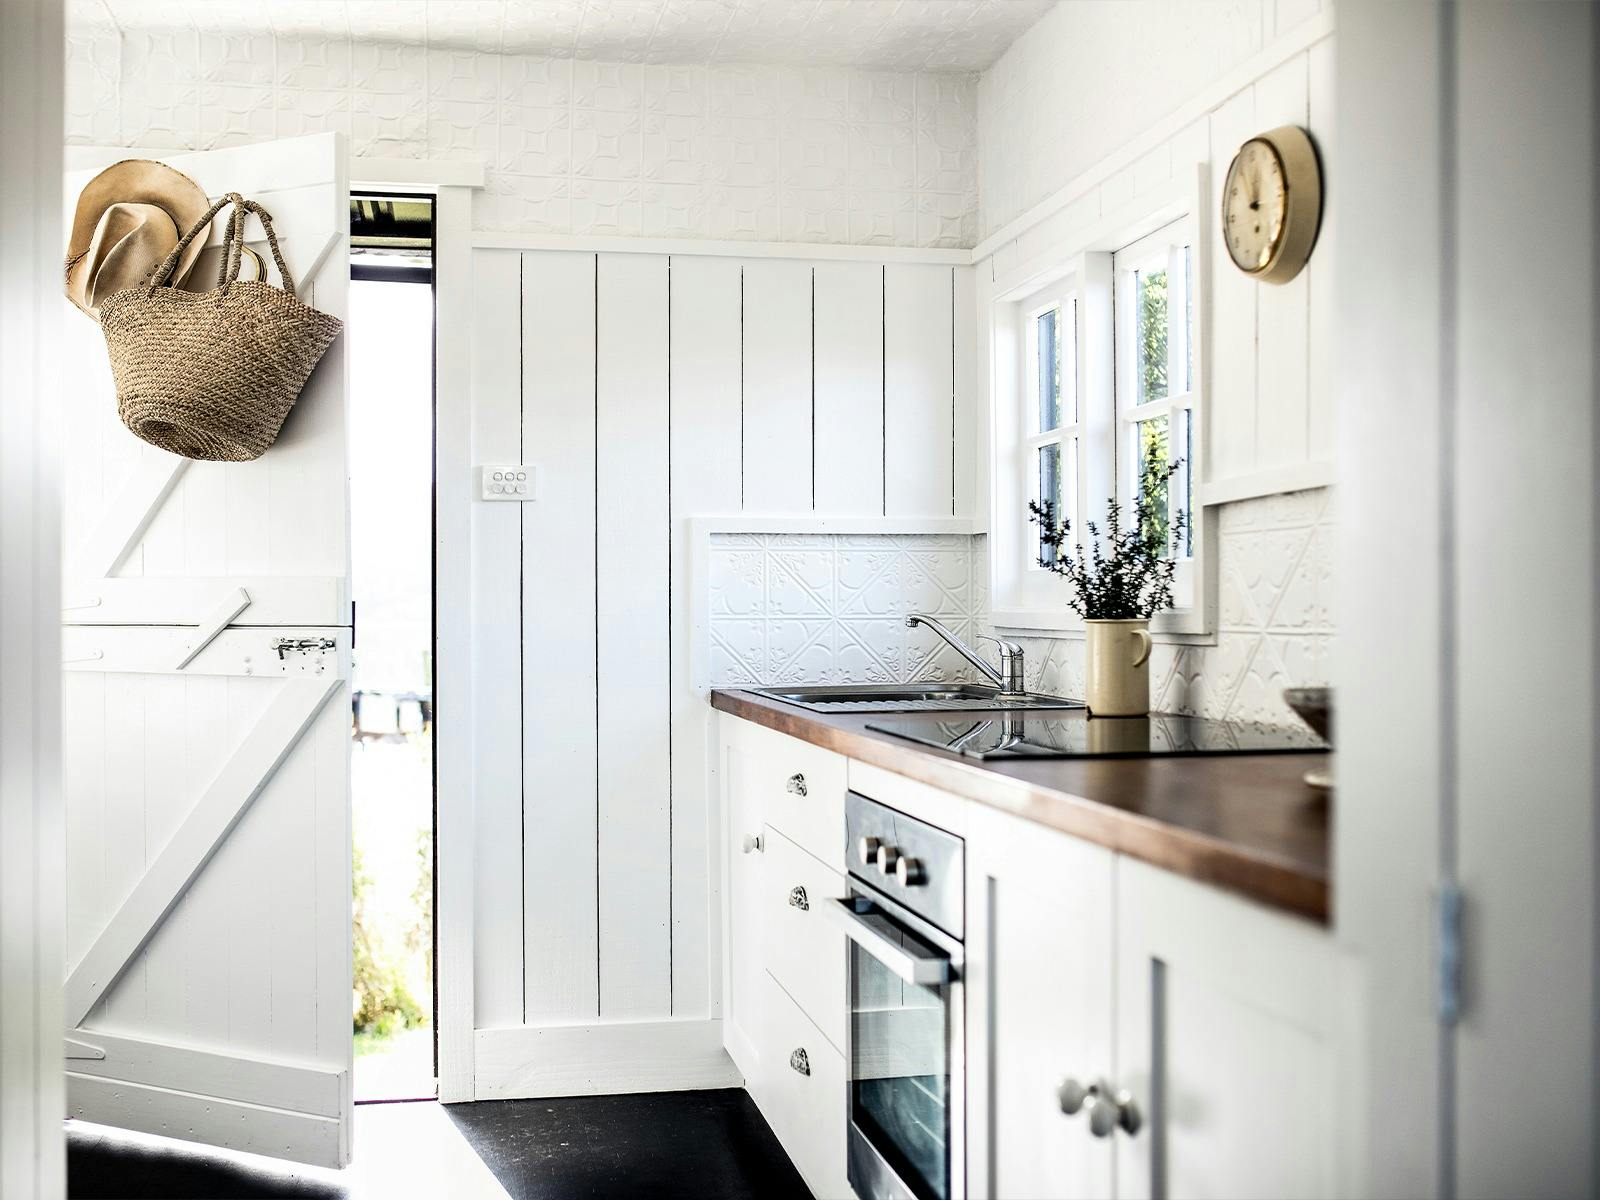 A white country style kitchen with a wooden benchtop